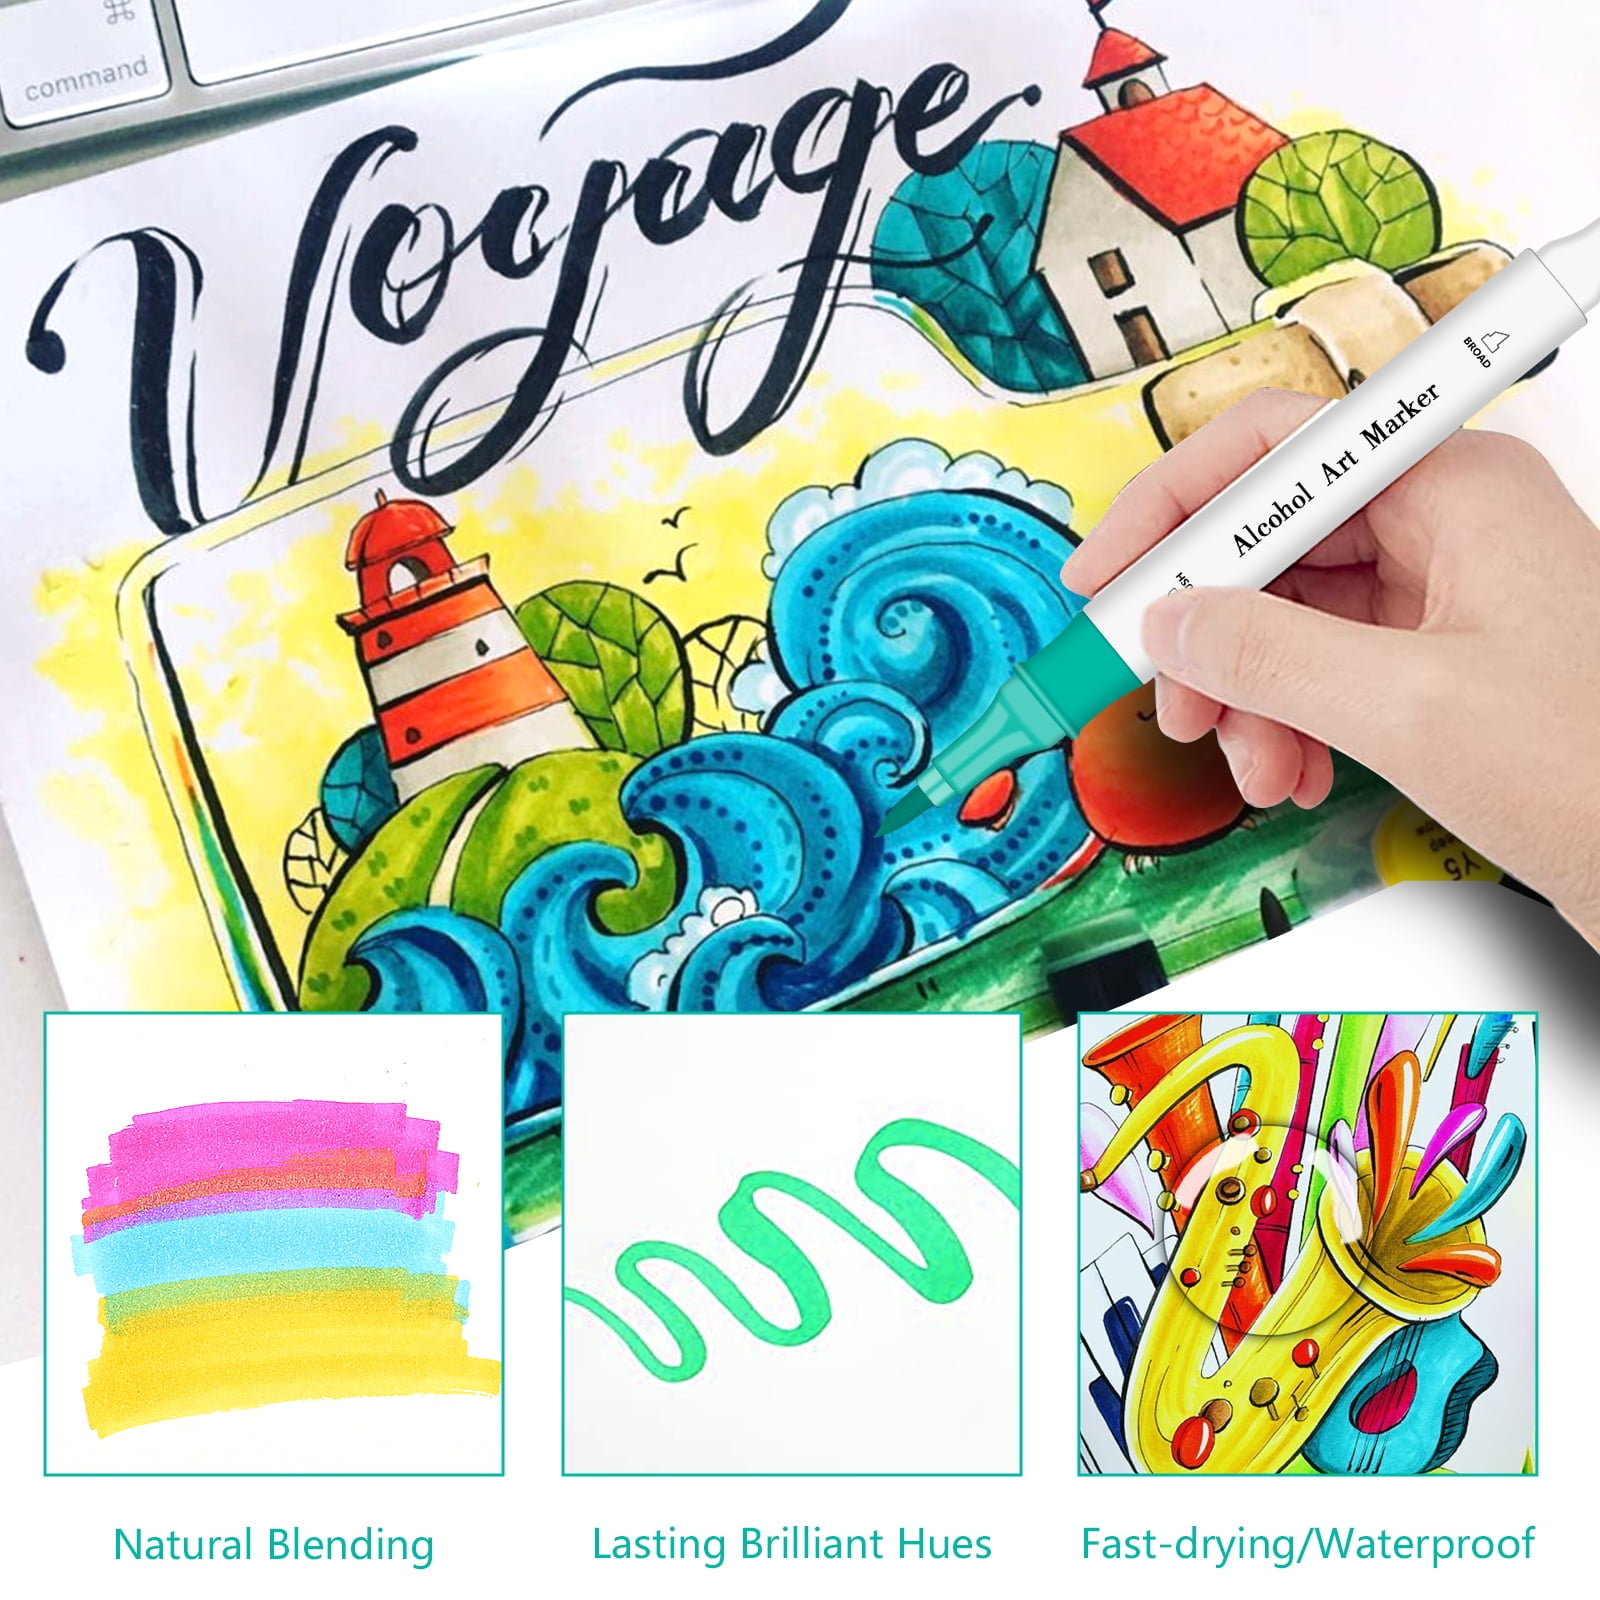 Artfinity Sketch Marker Sets - Vibrant, Professional, Dye-Based Alcohol  Markers for Artists, Drawing, Students, Travel, & More! - [Suntan E2-3 - Set  of 3] 